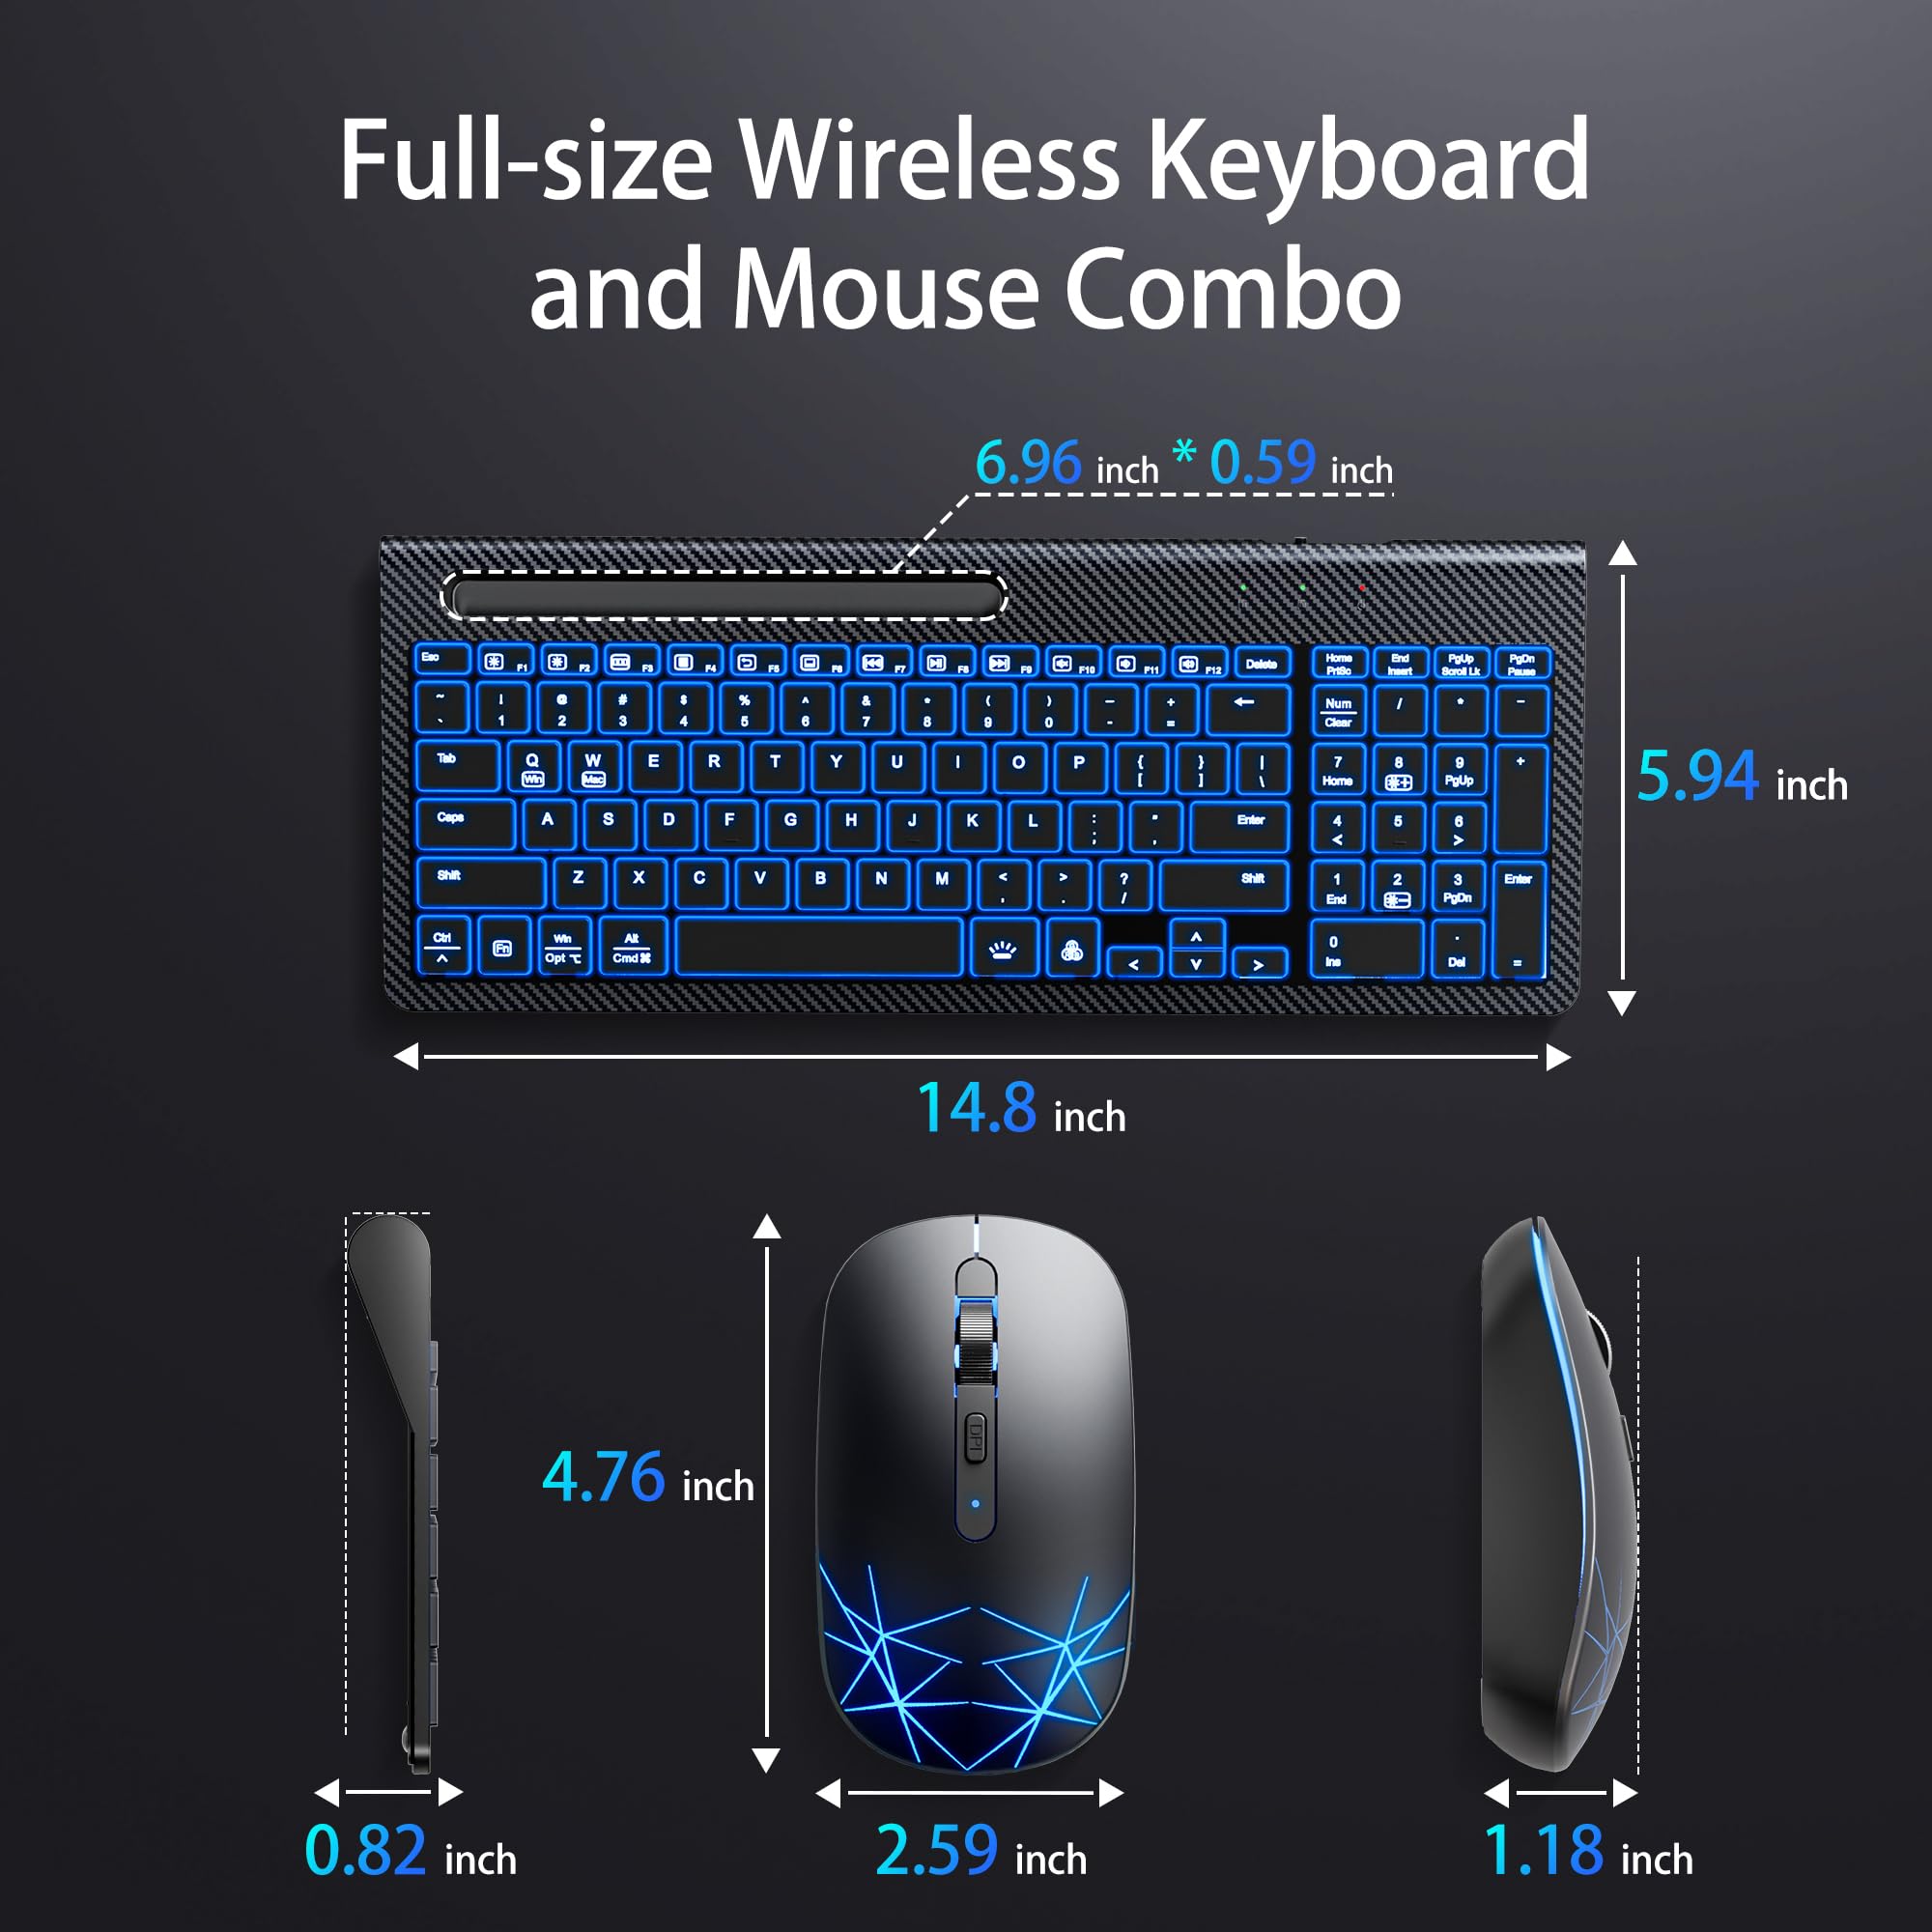 Wireless Keyboard and Mouse, Rechargeable, Adjustable 7 Color Backlight, Ergonomic, Quiet, with Phone Holder, 2.4G Stable Connection Slim Mac Keyboard and Mouse for PC, Laptop, MacBook, Windows